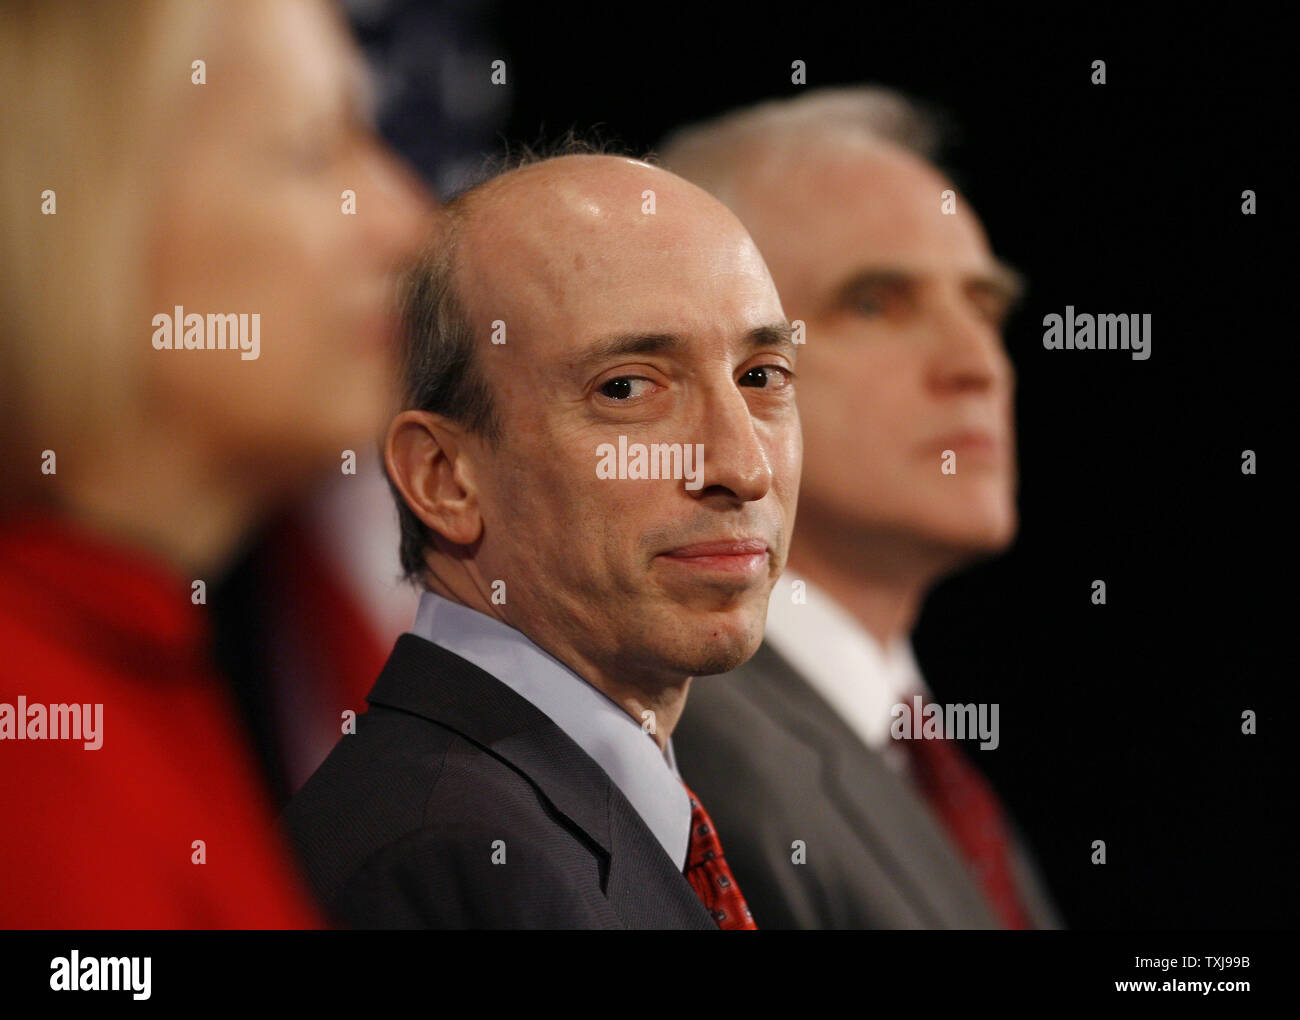 Gary Gensler (C), the new head of the Commodity Futures Trading Commission, stands with Mary Schapiro (L), the new head the of the Securities and Exchange Commission, and Daniel Tarullo, a new member of the Federal Reserve board, during a news conference at which President-elect Barack Obama introduced the three on December 18, 2008 in Chicago.  By appointing these non-cabinet positions at this early date, Obama stressed the importance of reforming regulations governing Wall Street to prevent future economic crises. (UPI Photo/Brian Kersey) Stock Photo